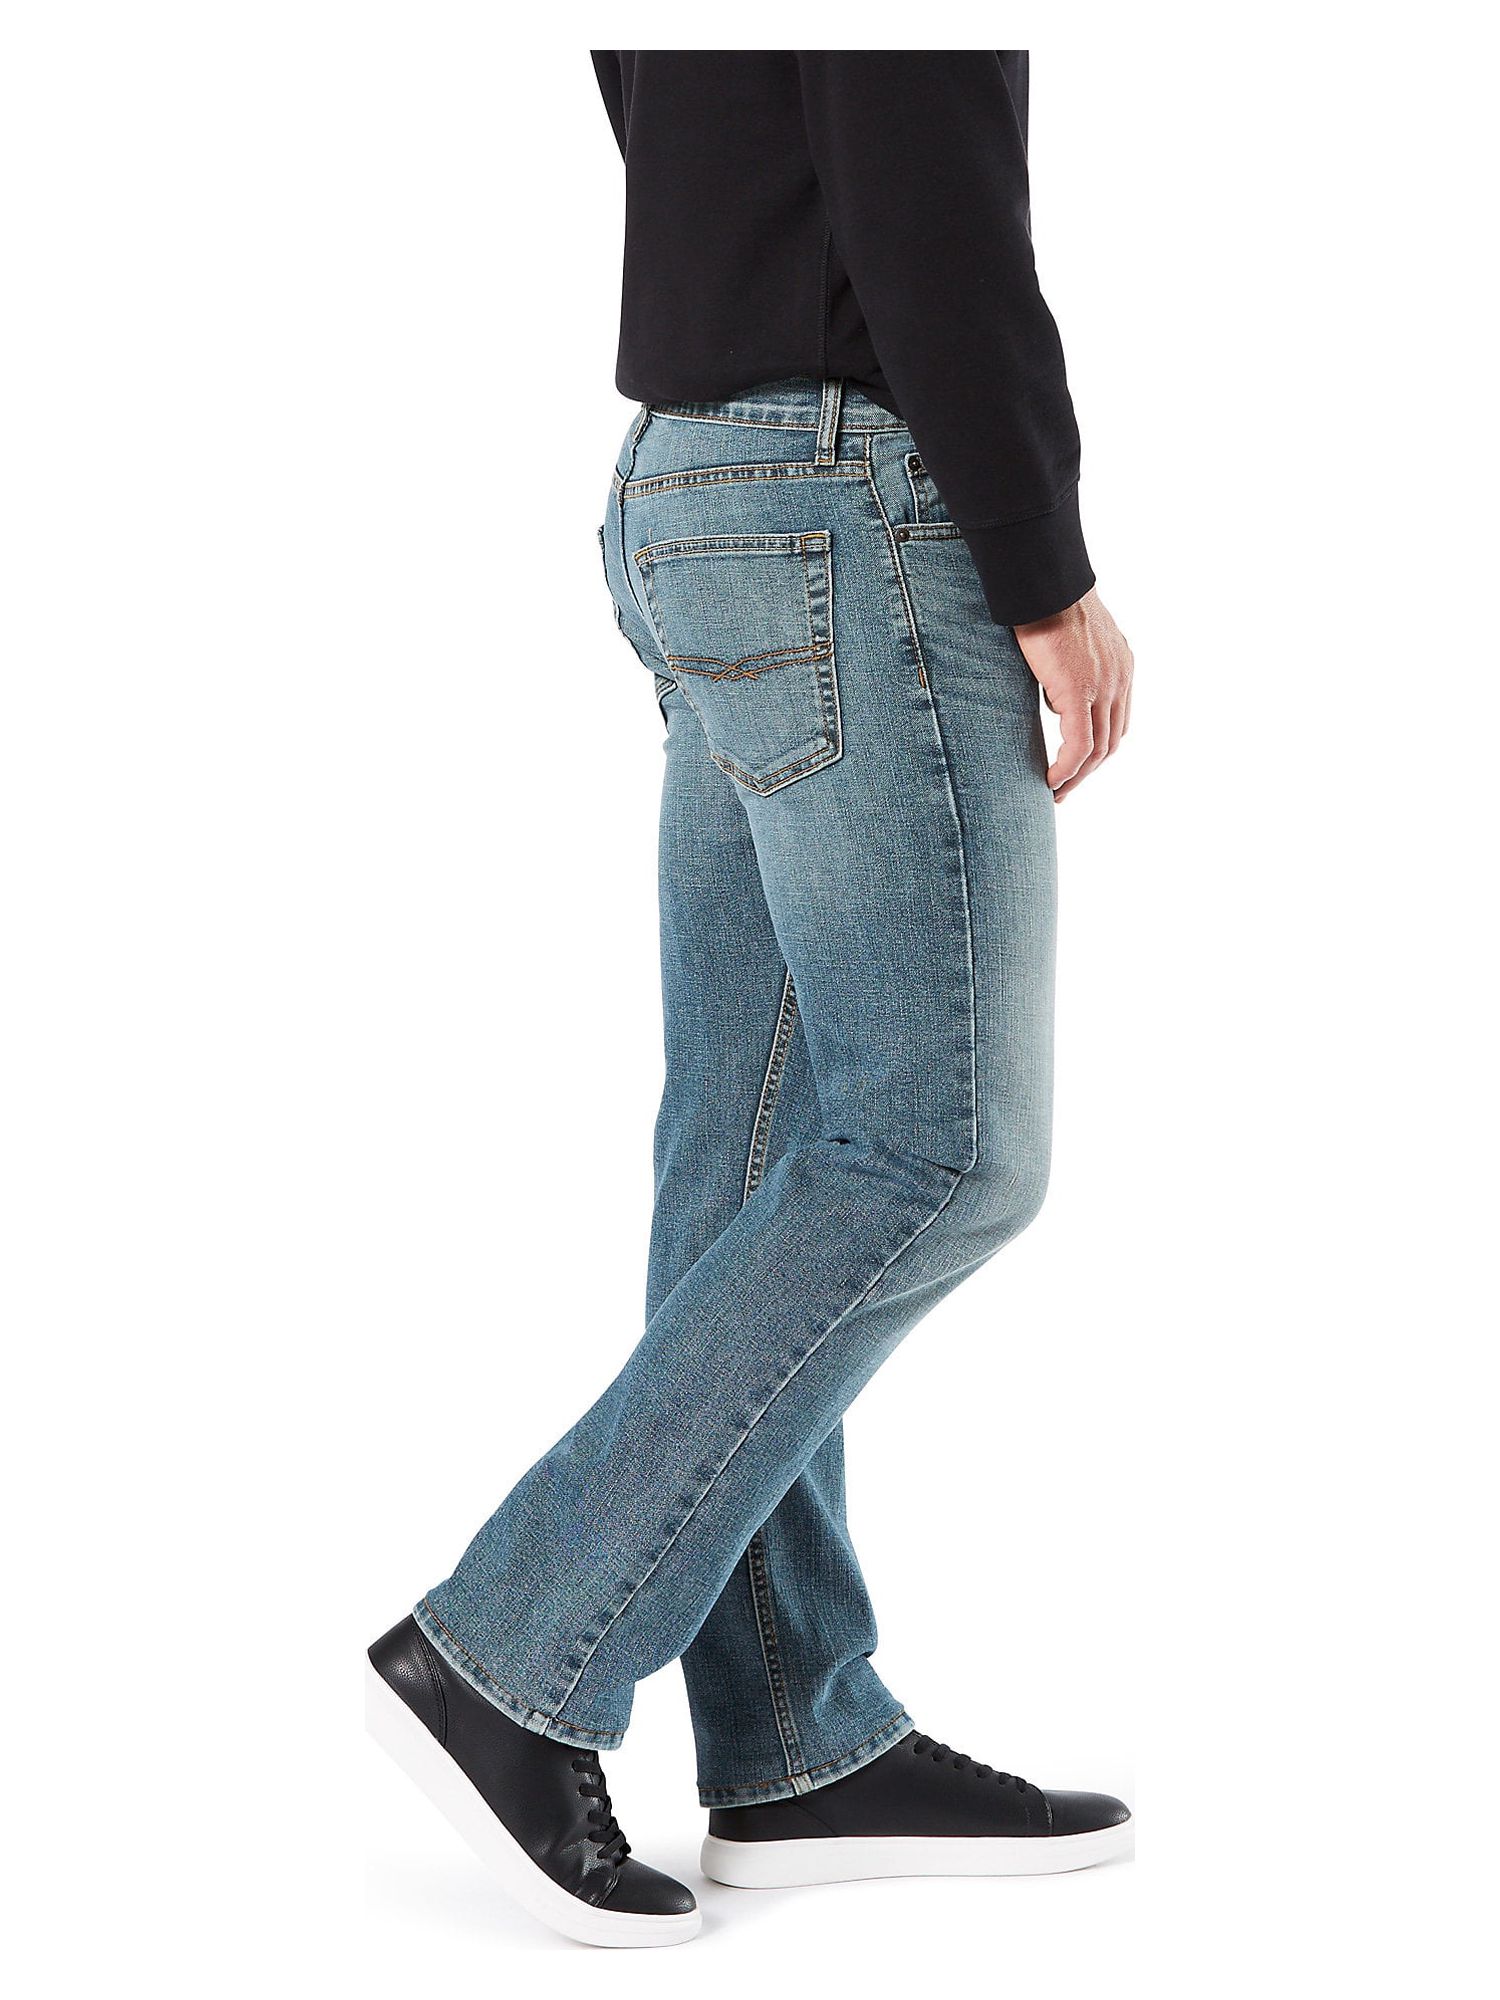 Signature by Levi Strauss & Co. Men's and Big and Tall Relaxed Fit Jeans - image 4 of 8